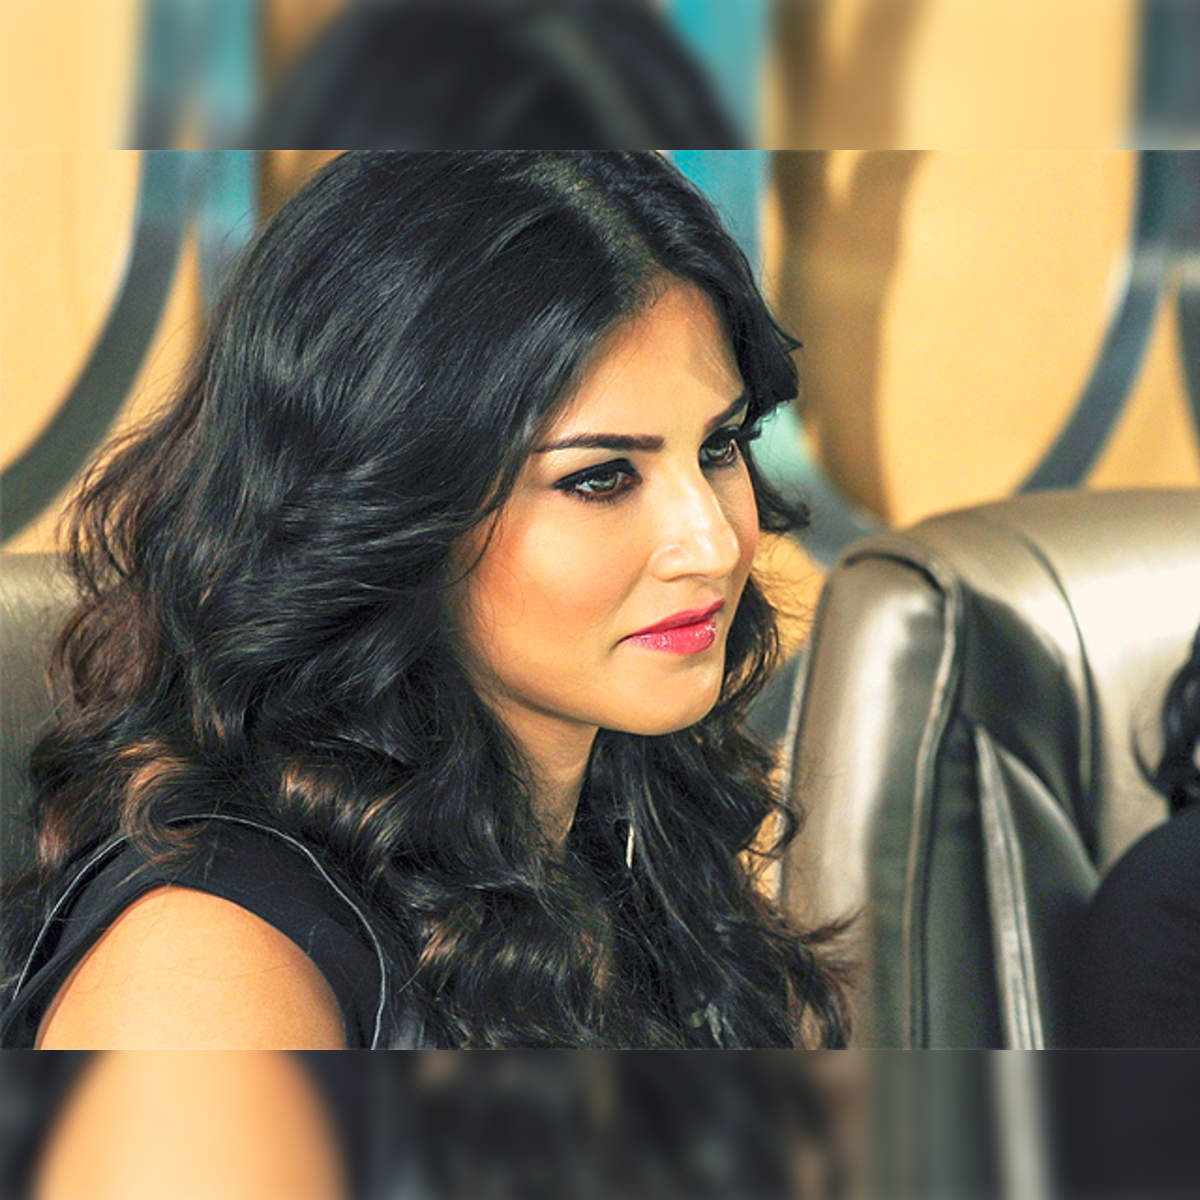 Improper to haunt me for my past: Sunny Leone - The Economic Times